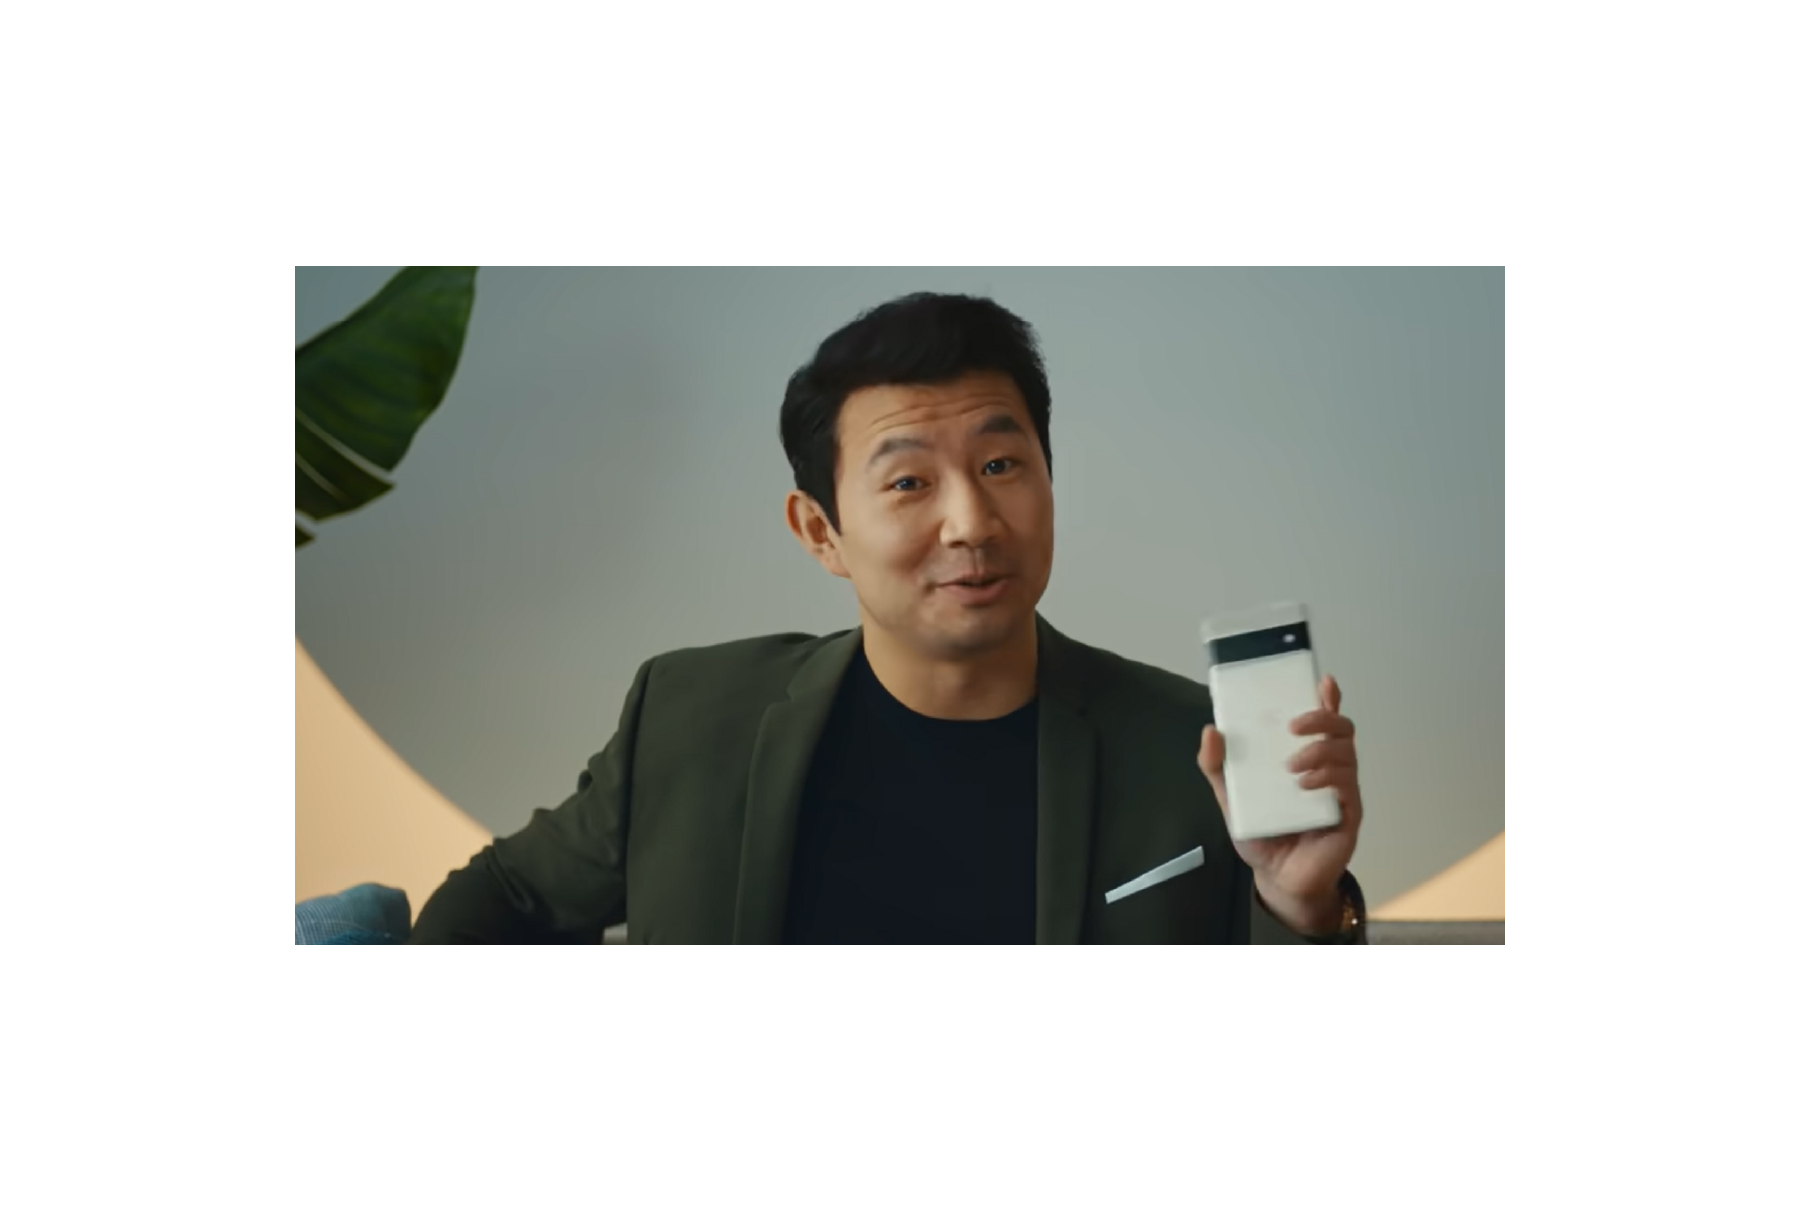 Inclusive marketing: Behind the scenes of the Google Pixel 6 campaign with Simu Liu